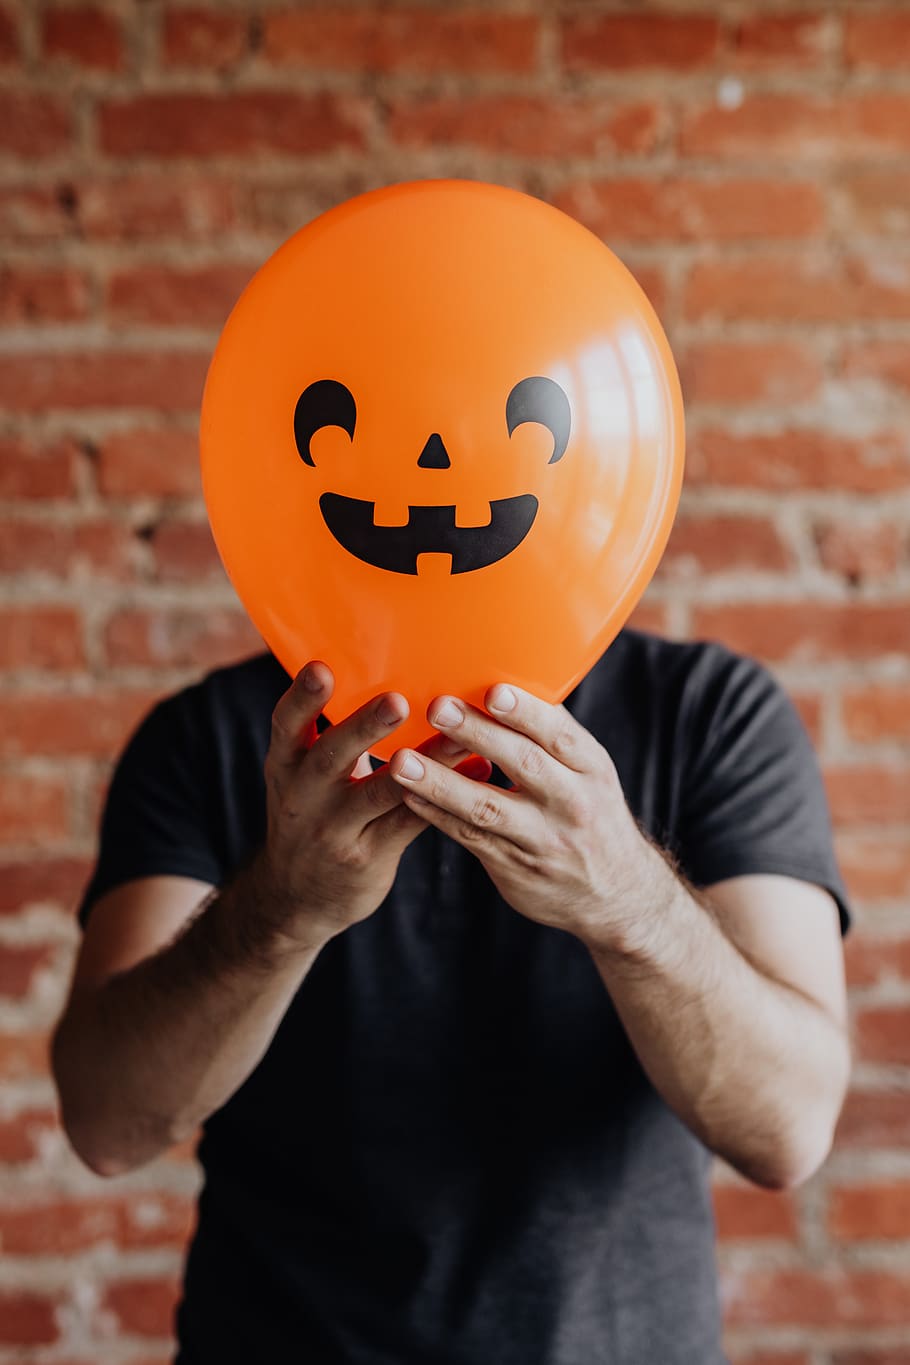 balloon, orange, face, funny, autumn, man, Halloween, one person, holding, front view